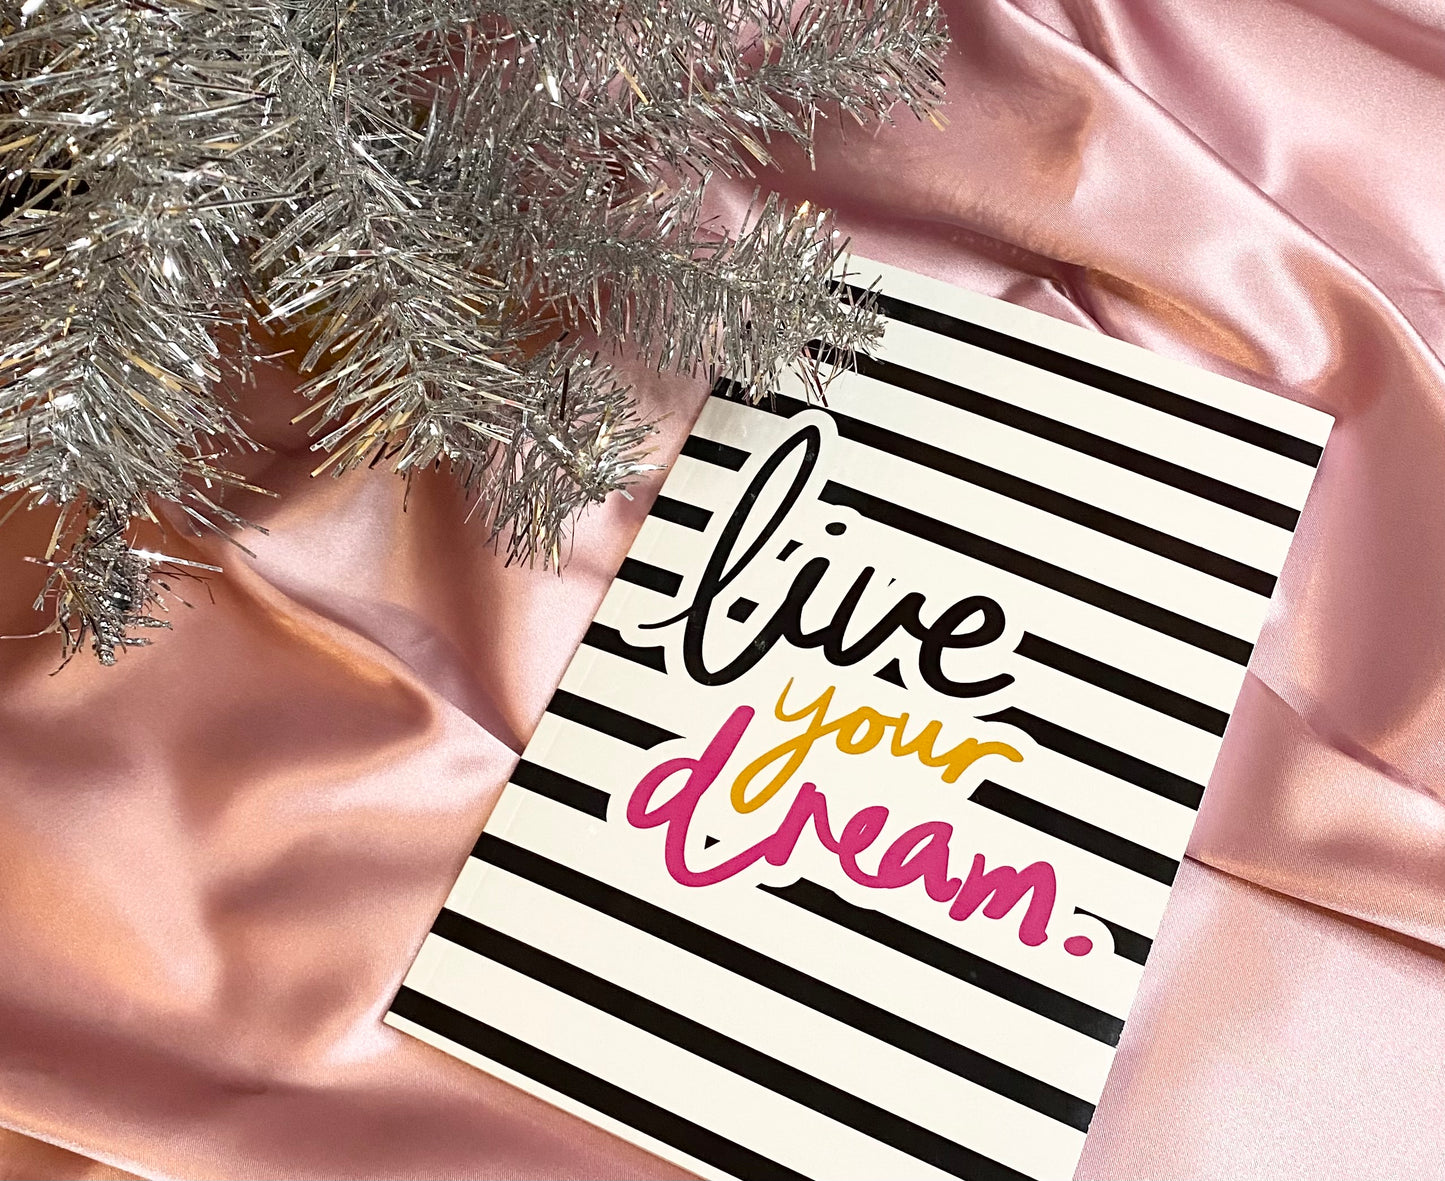 Live Your Dream Journal